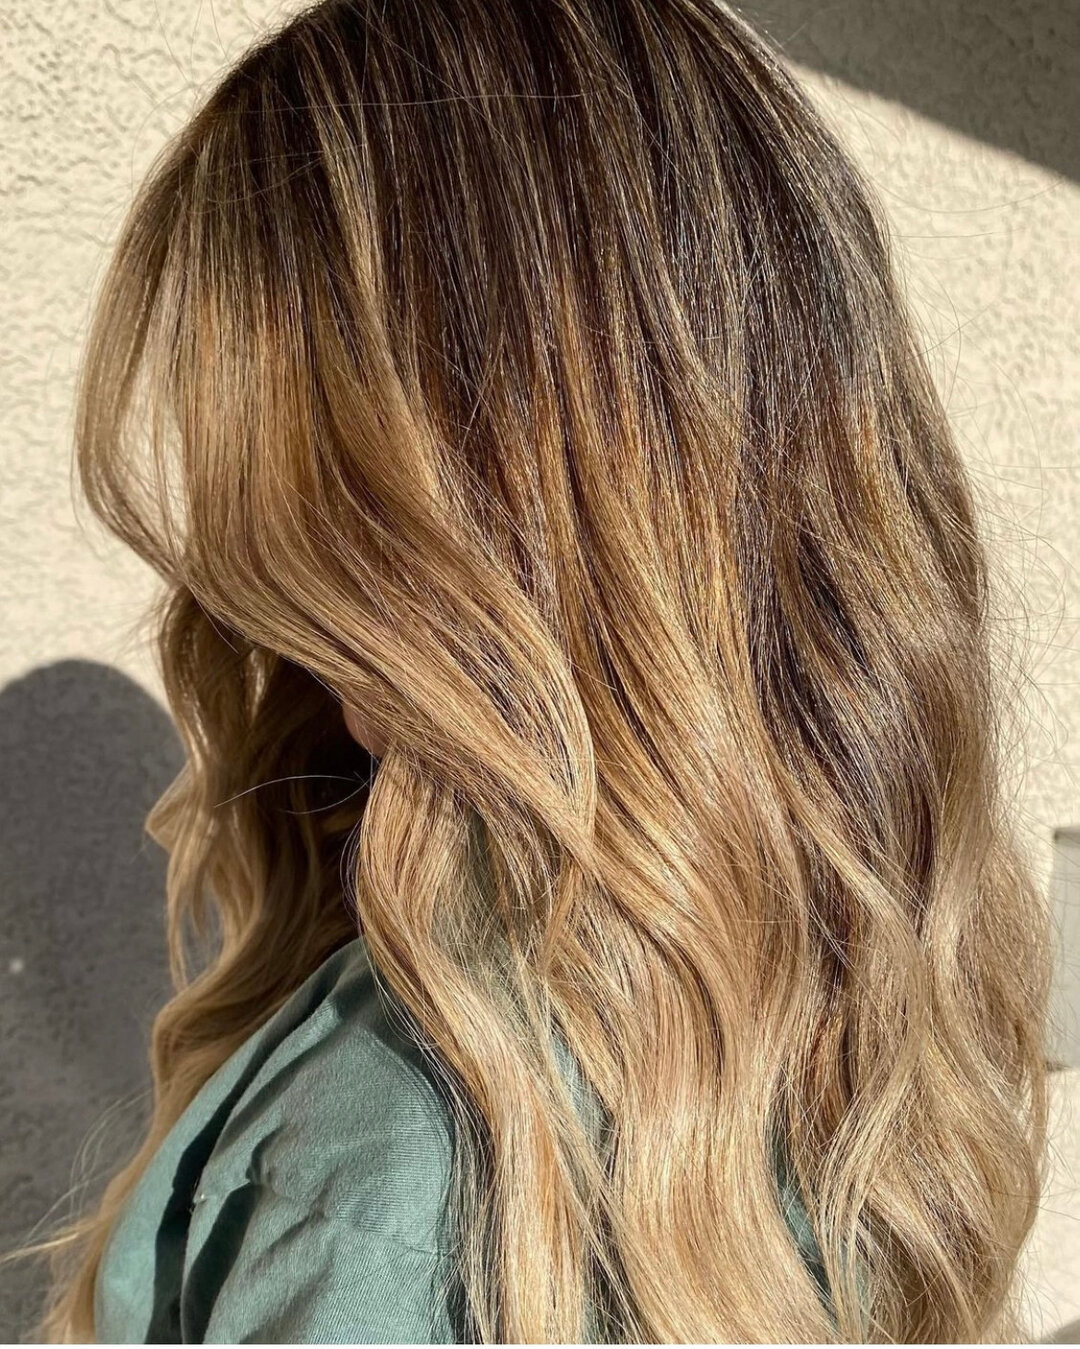 Long hair love 😍 This golden hour photo of a blended balayage has all the shine and beauty you crave. ​​​​​​​​
&bull;​​​​​​​​
Artist &bull; @jmk.beauty​​​​​​​​
Color &bull; @wellahair ​​​​​​​​
Styling &bull; @unite_hair ​​​​​​​​
&bull; ​​​​​​​​
#bal